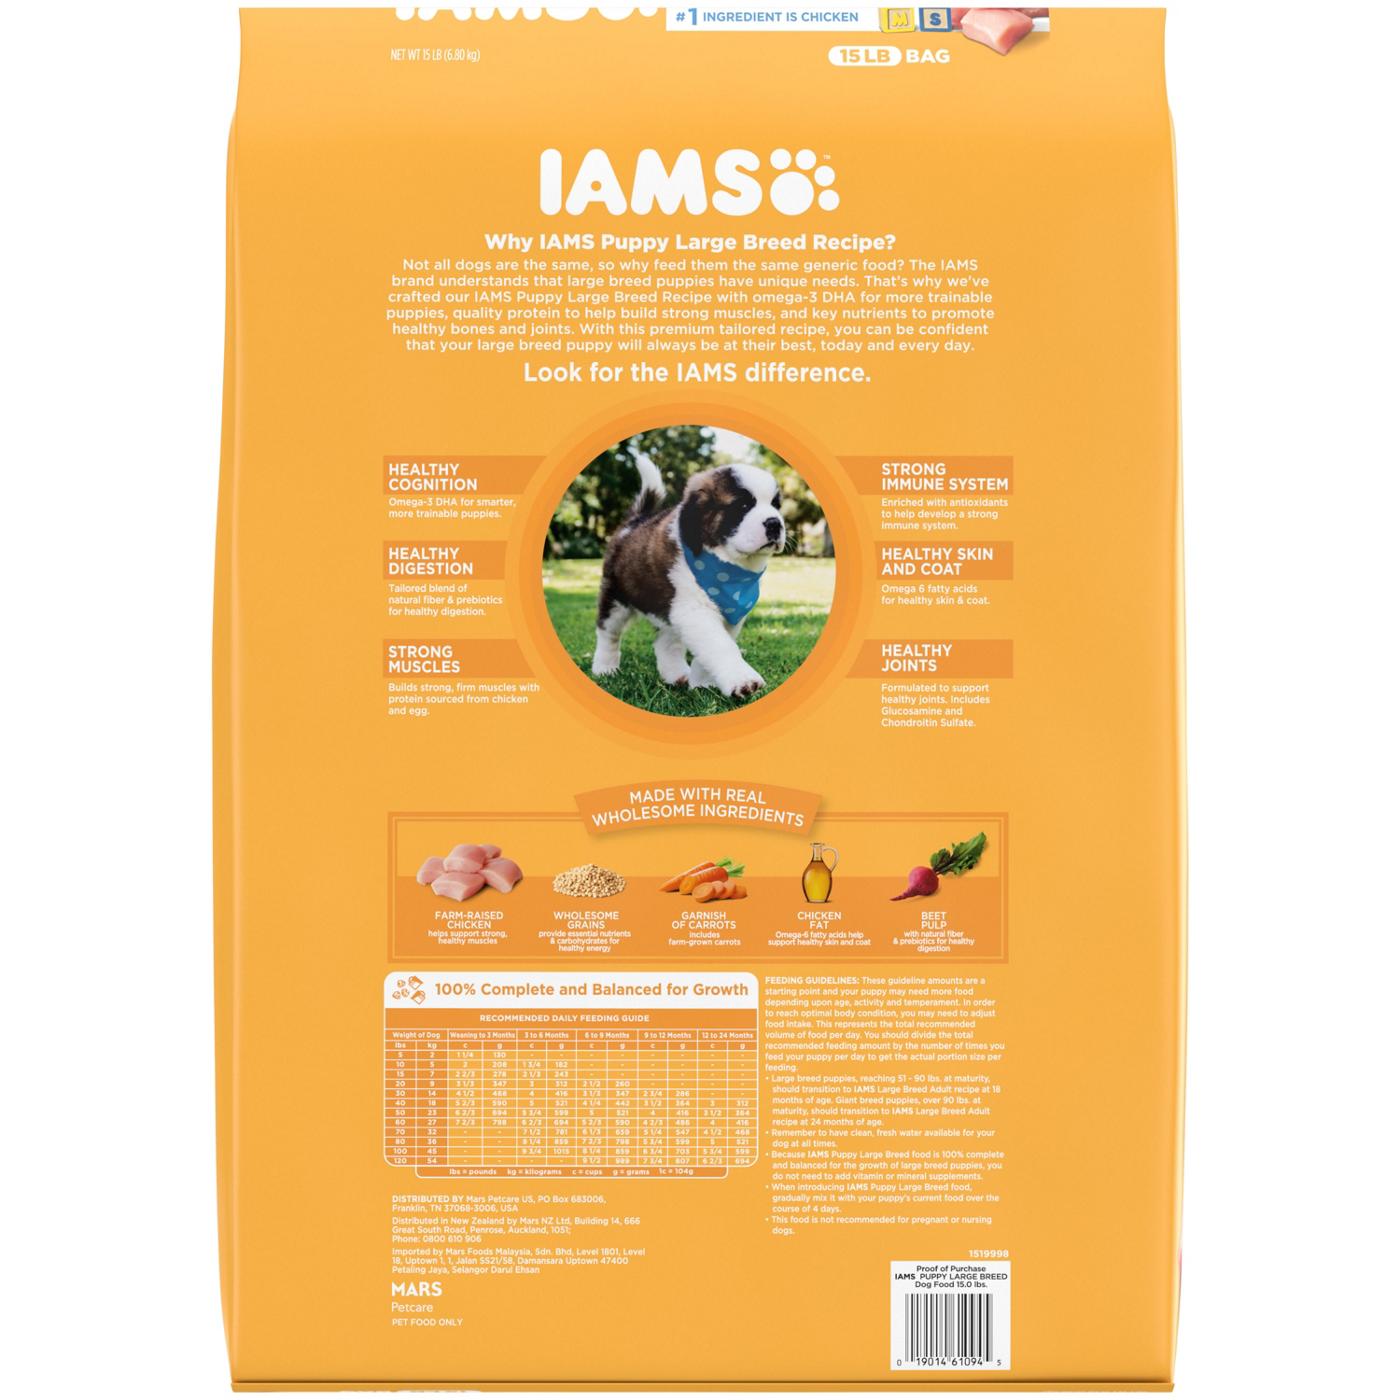 IAMS Smart Puppy Large Breed Dry Puppy Food with Real Chicken; image 6 of 6